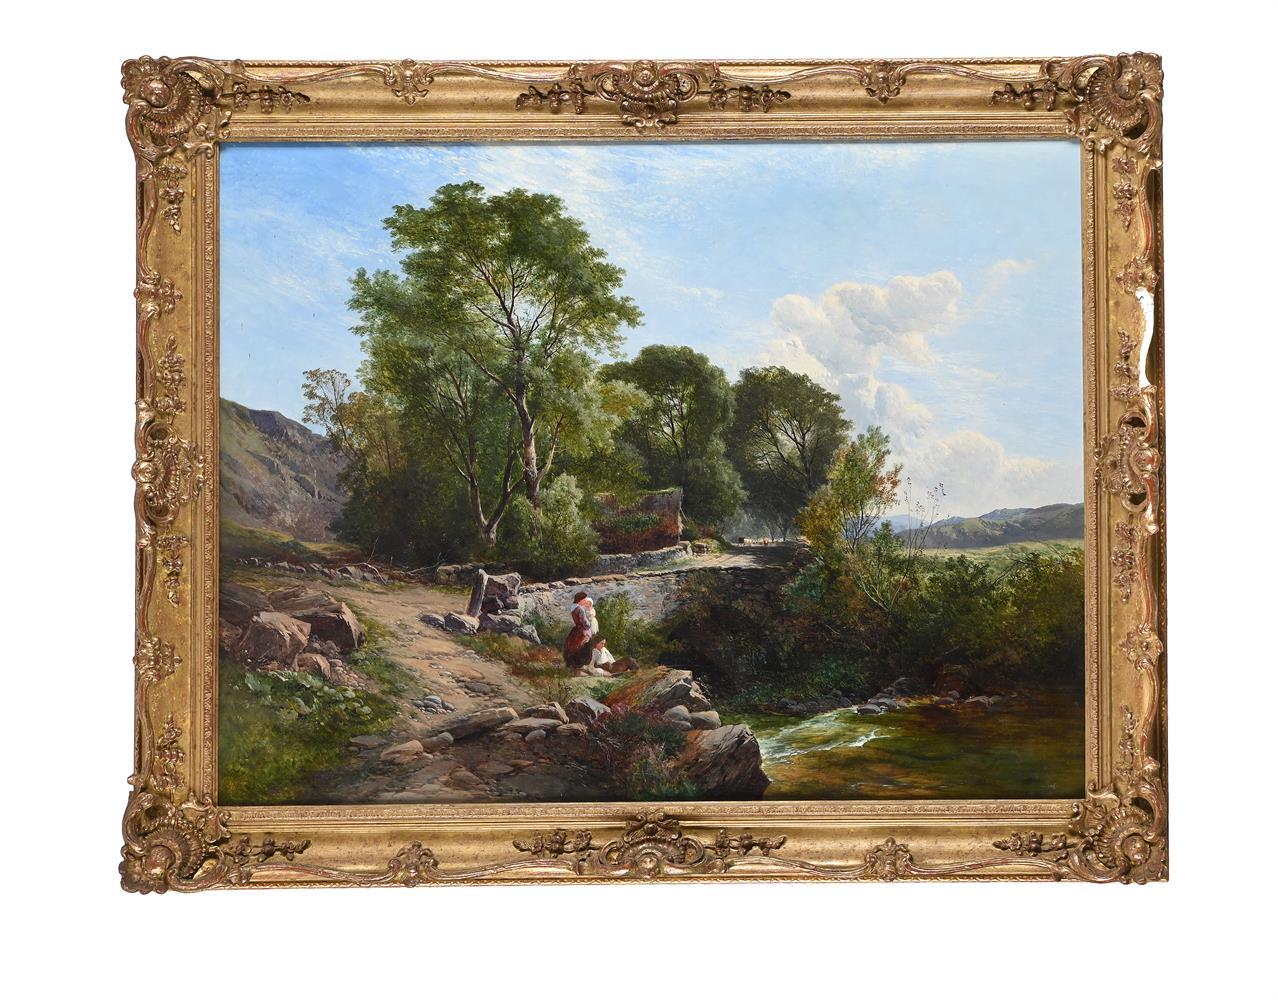 19th century English Victorian oil landscape with figures, a stream and trees